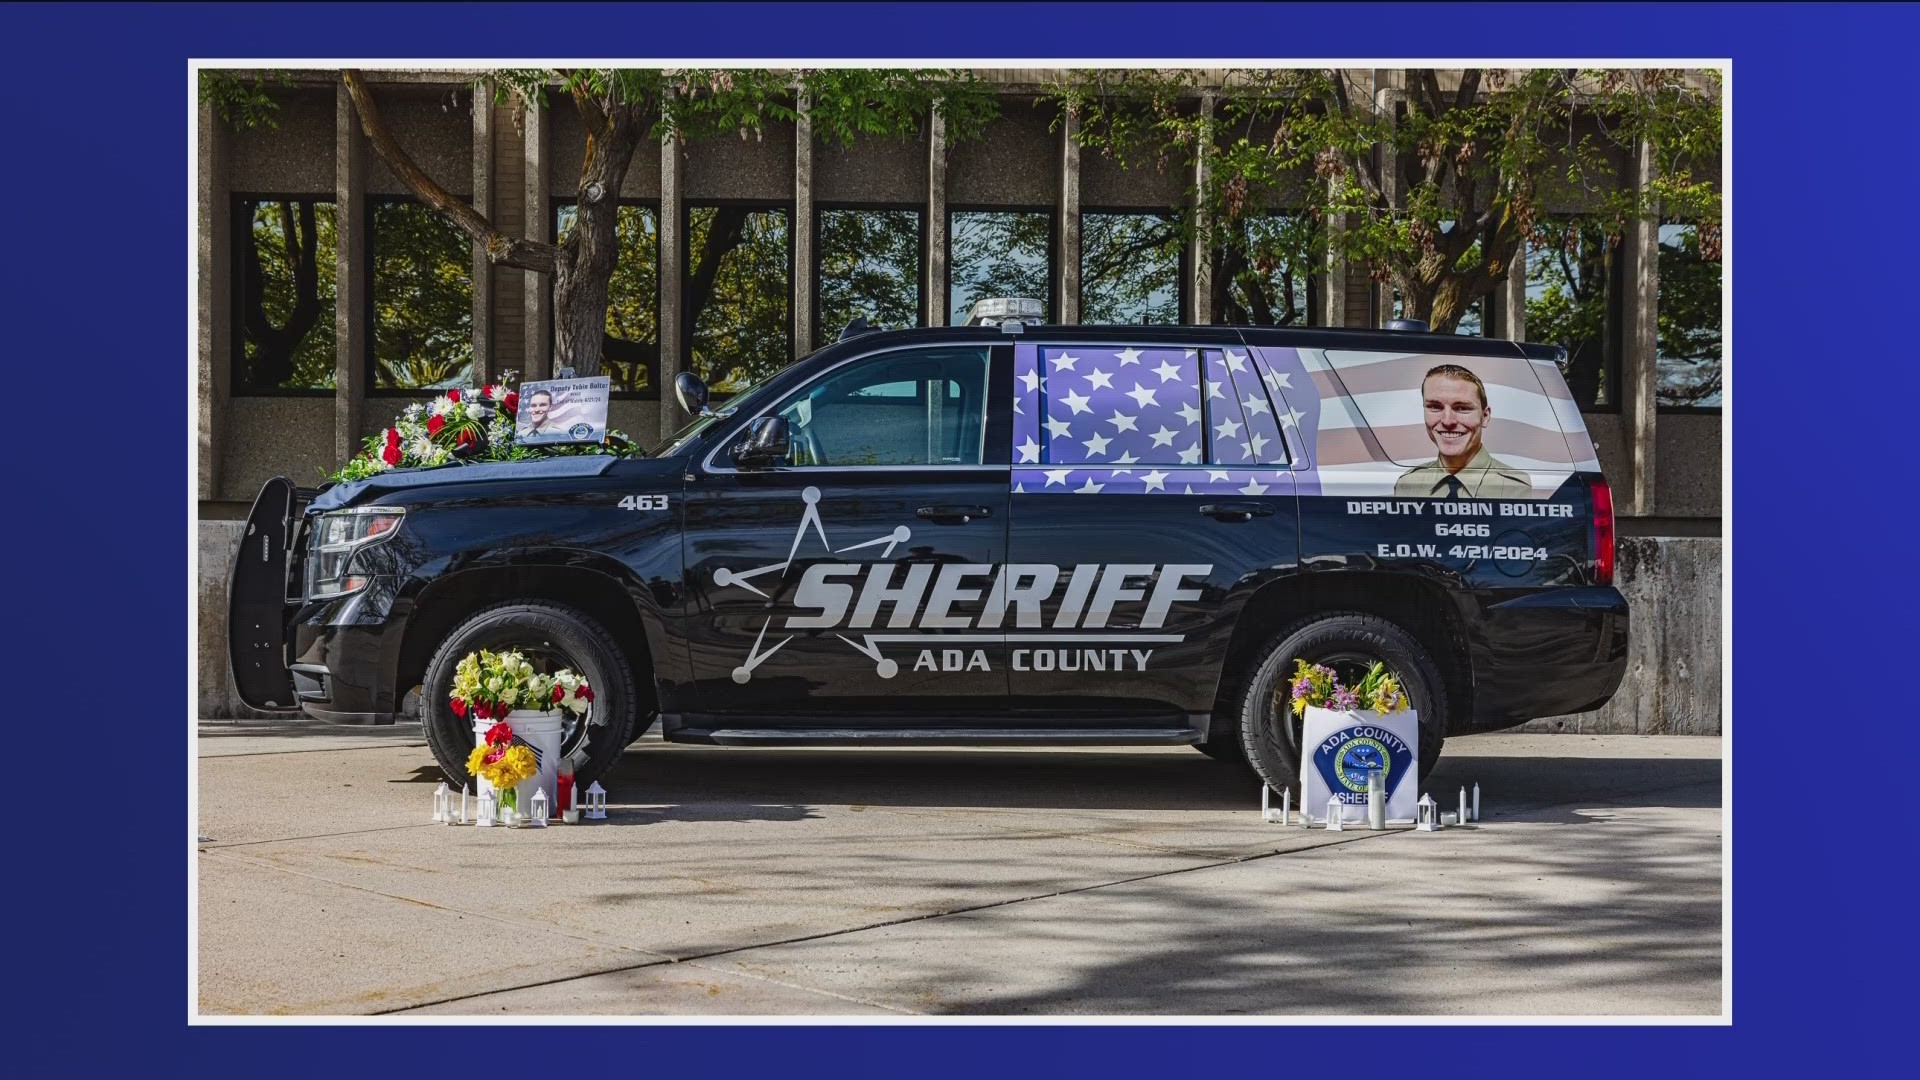 Law enforcement offices in several areas have set up memorials for the deputy where people can pay their respects.